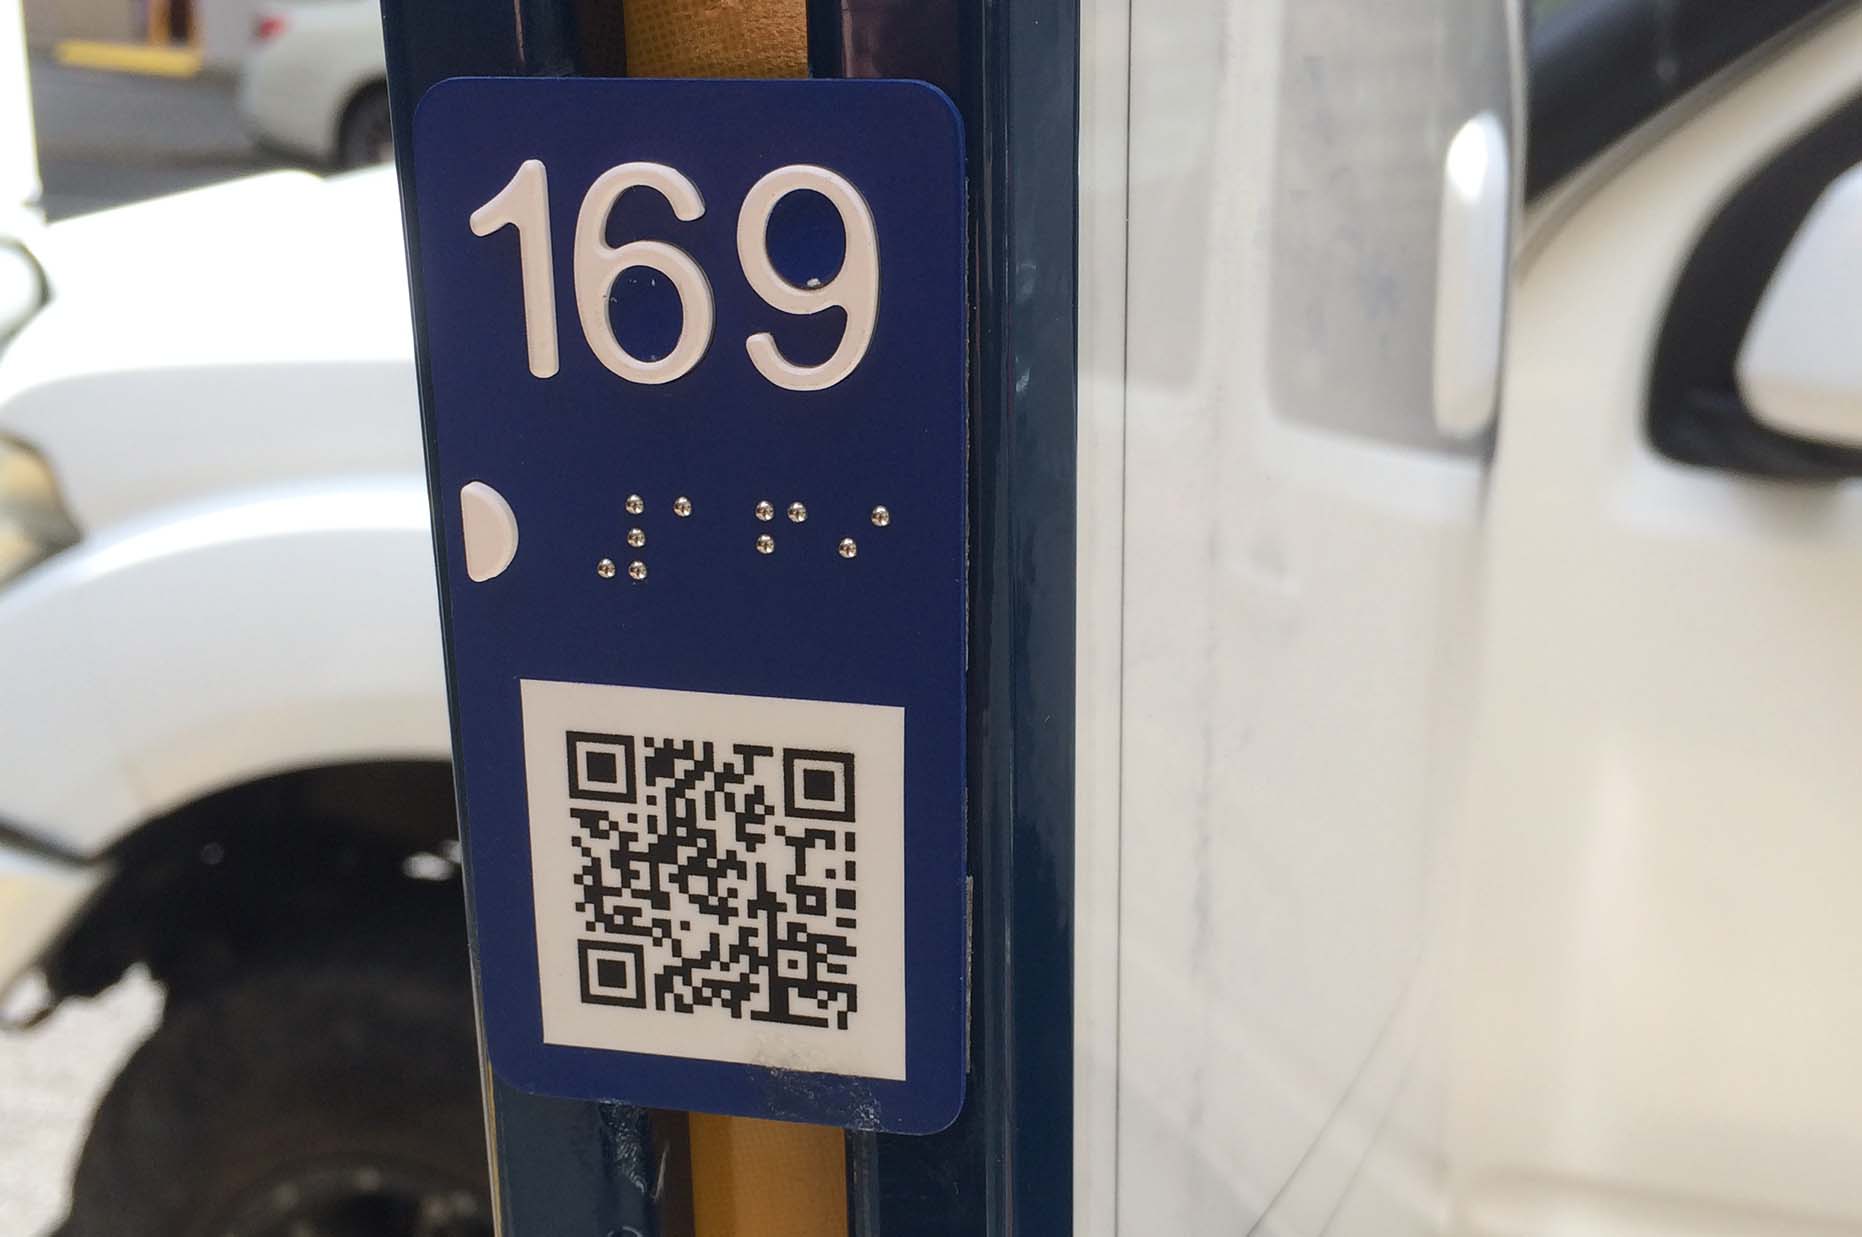 Bus stop with 169 written numbers and in braille, also displaying a QR code 